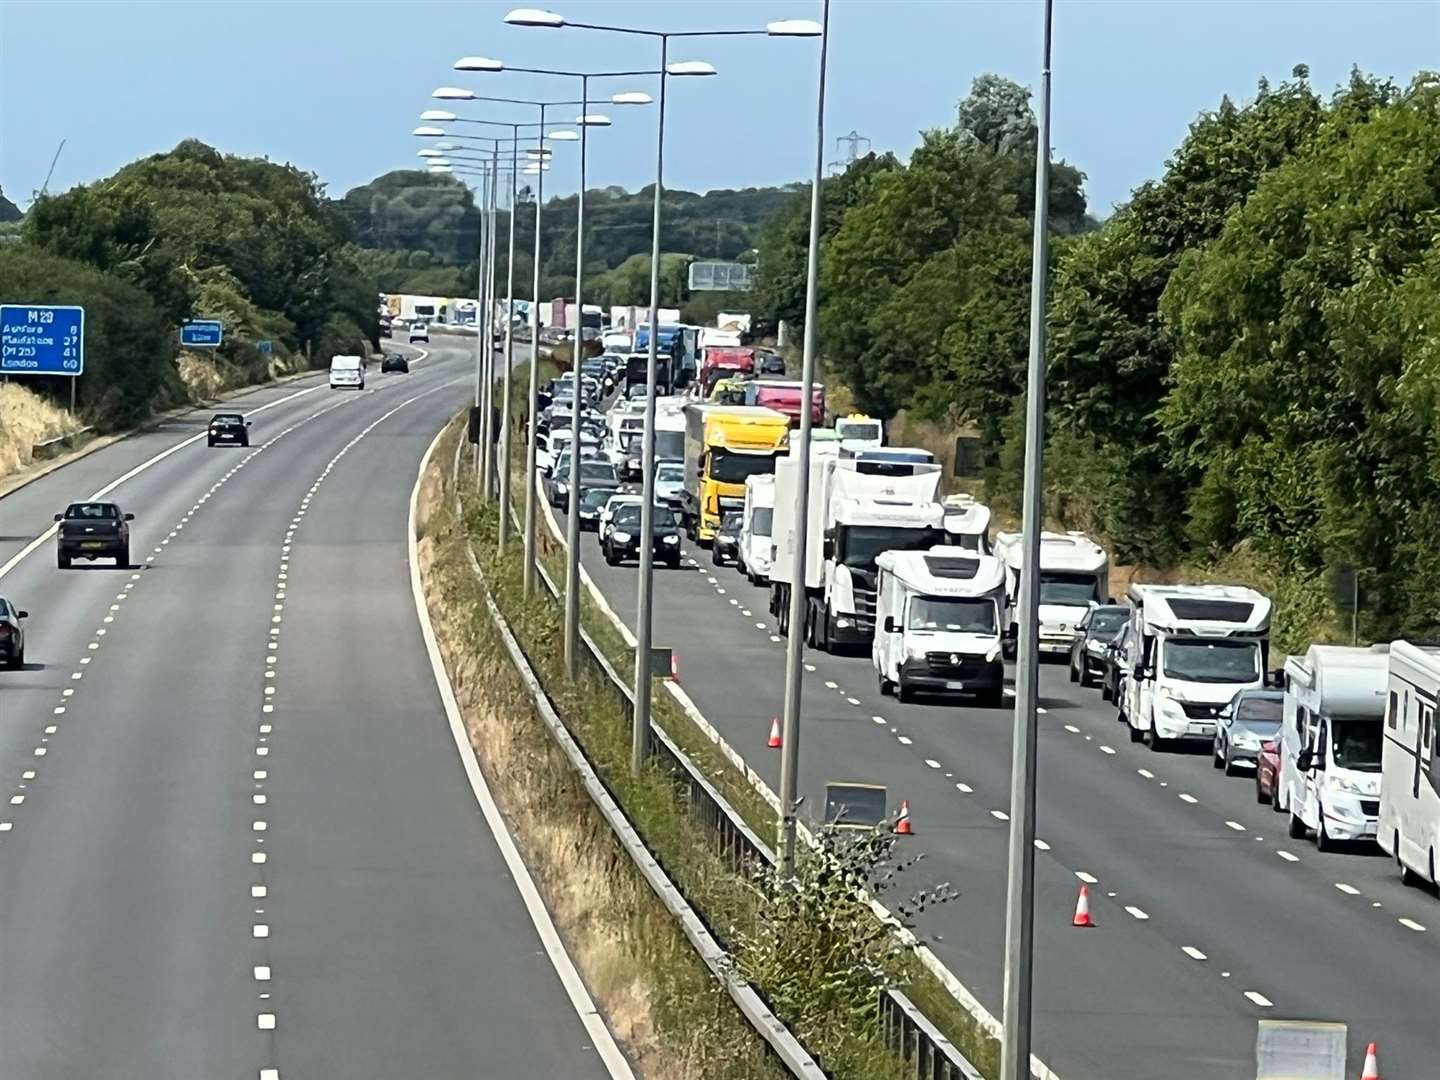 Non-freight traffic has been taken off the M20 to divert along the A20